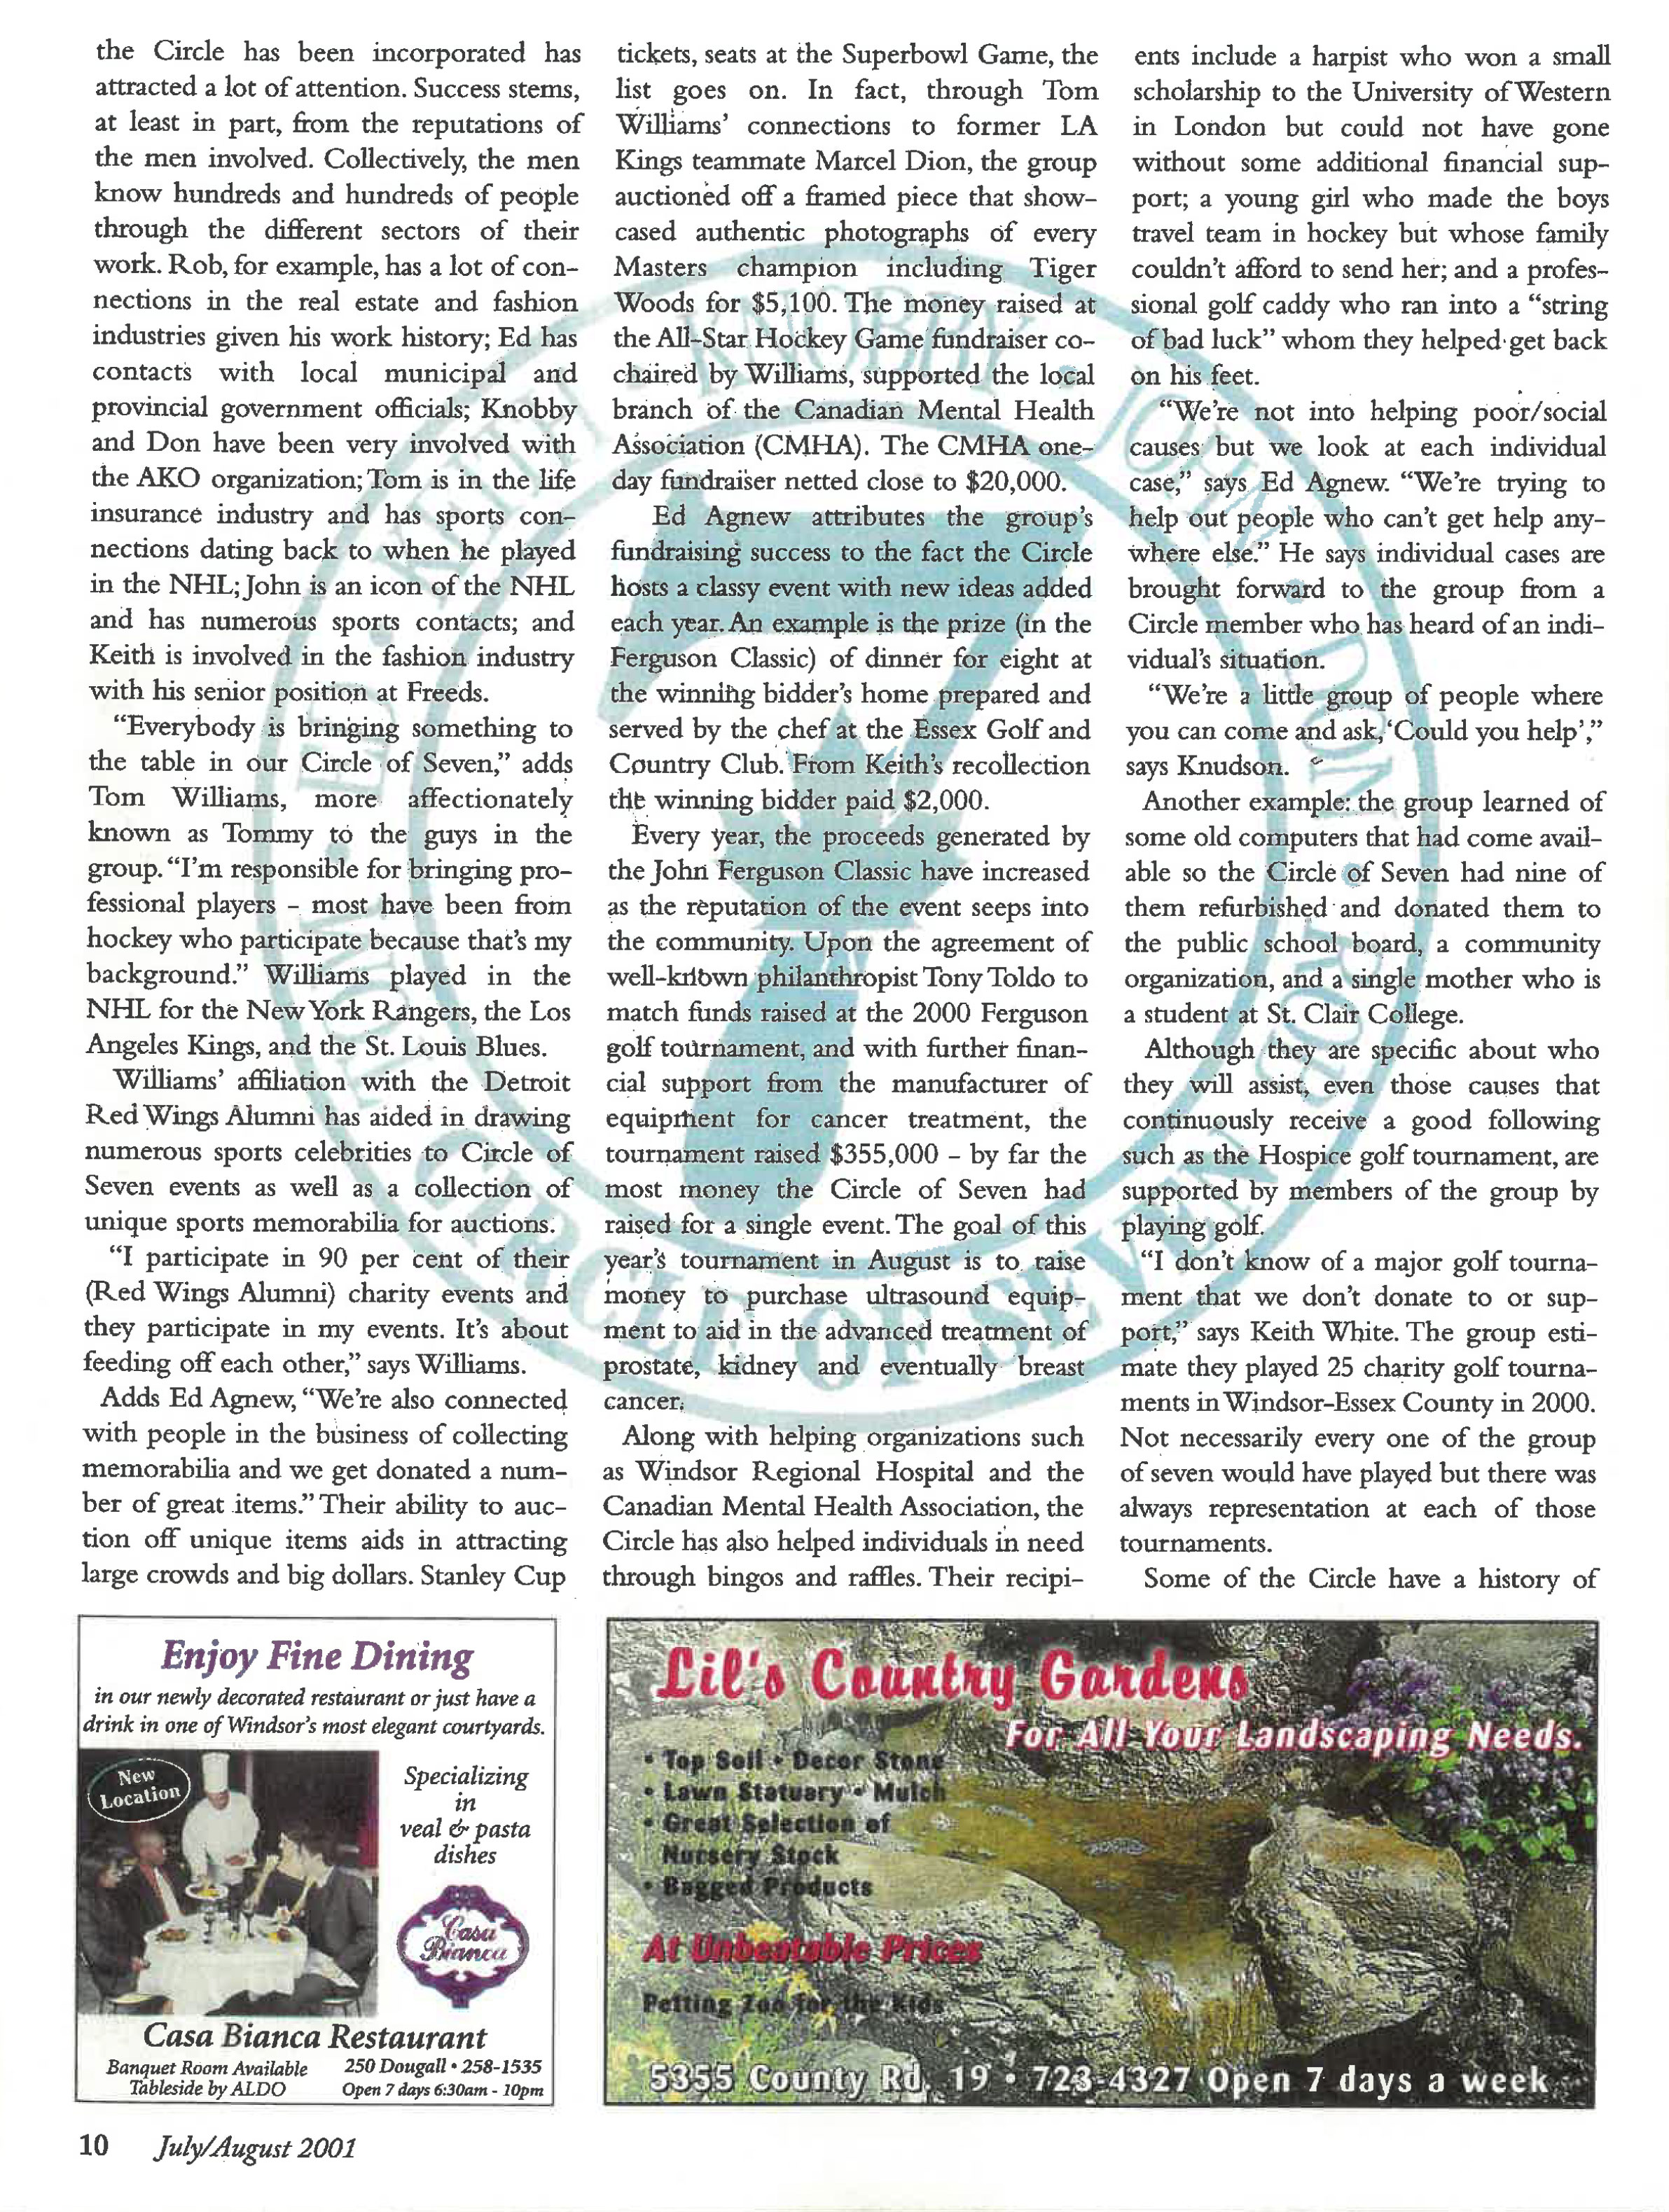 The magic of Seven Article page 3